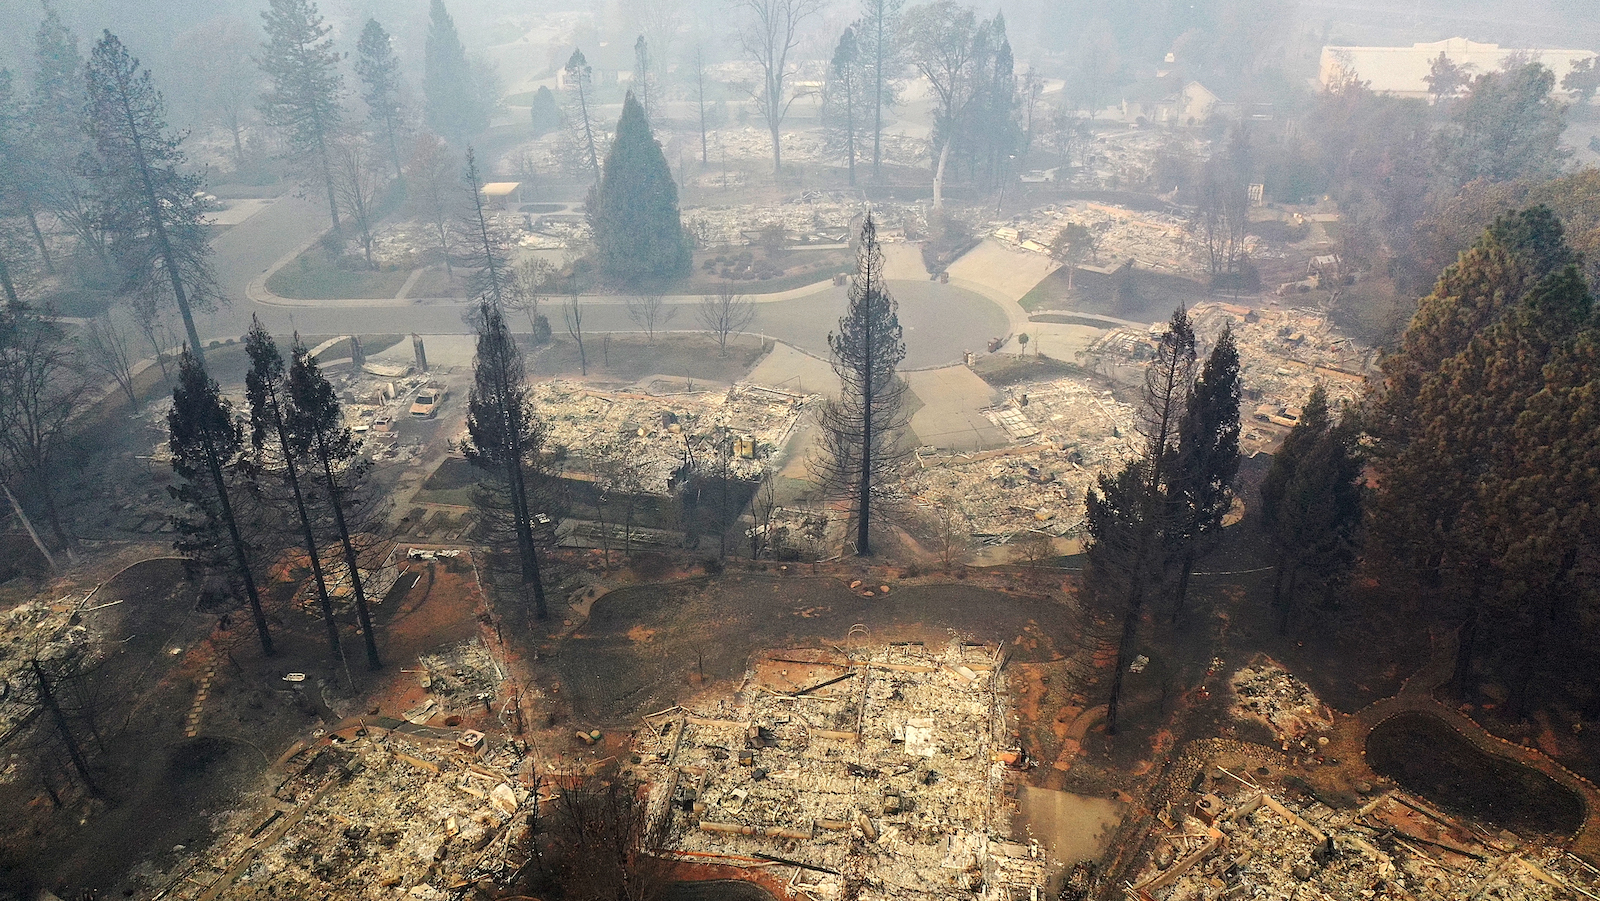 Photos Show Paradise, California, One Year After Camp Fire Devastation